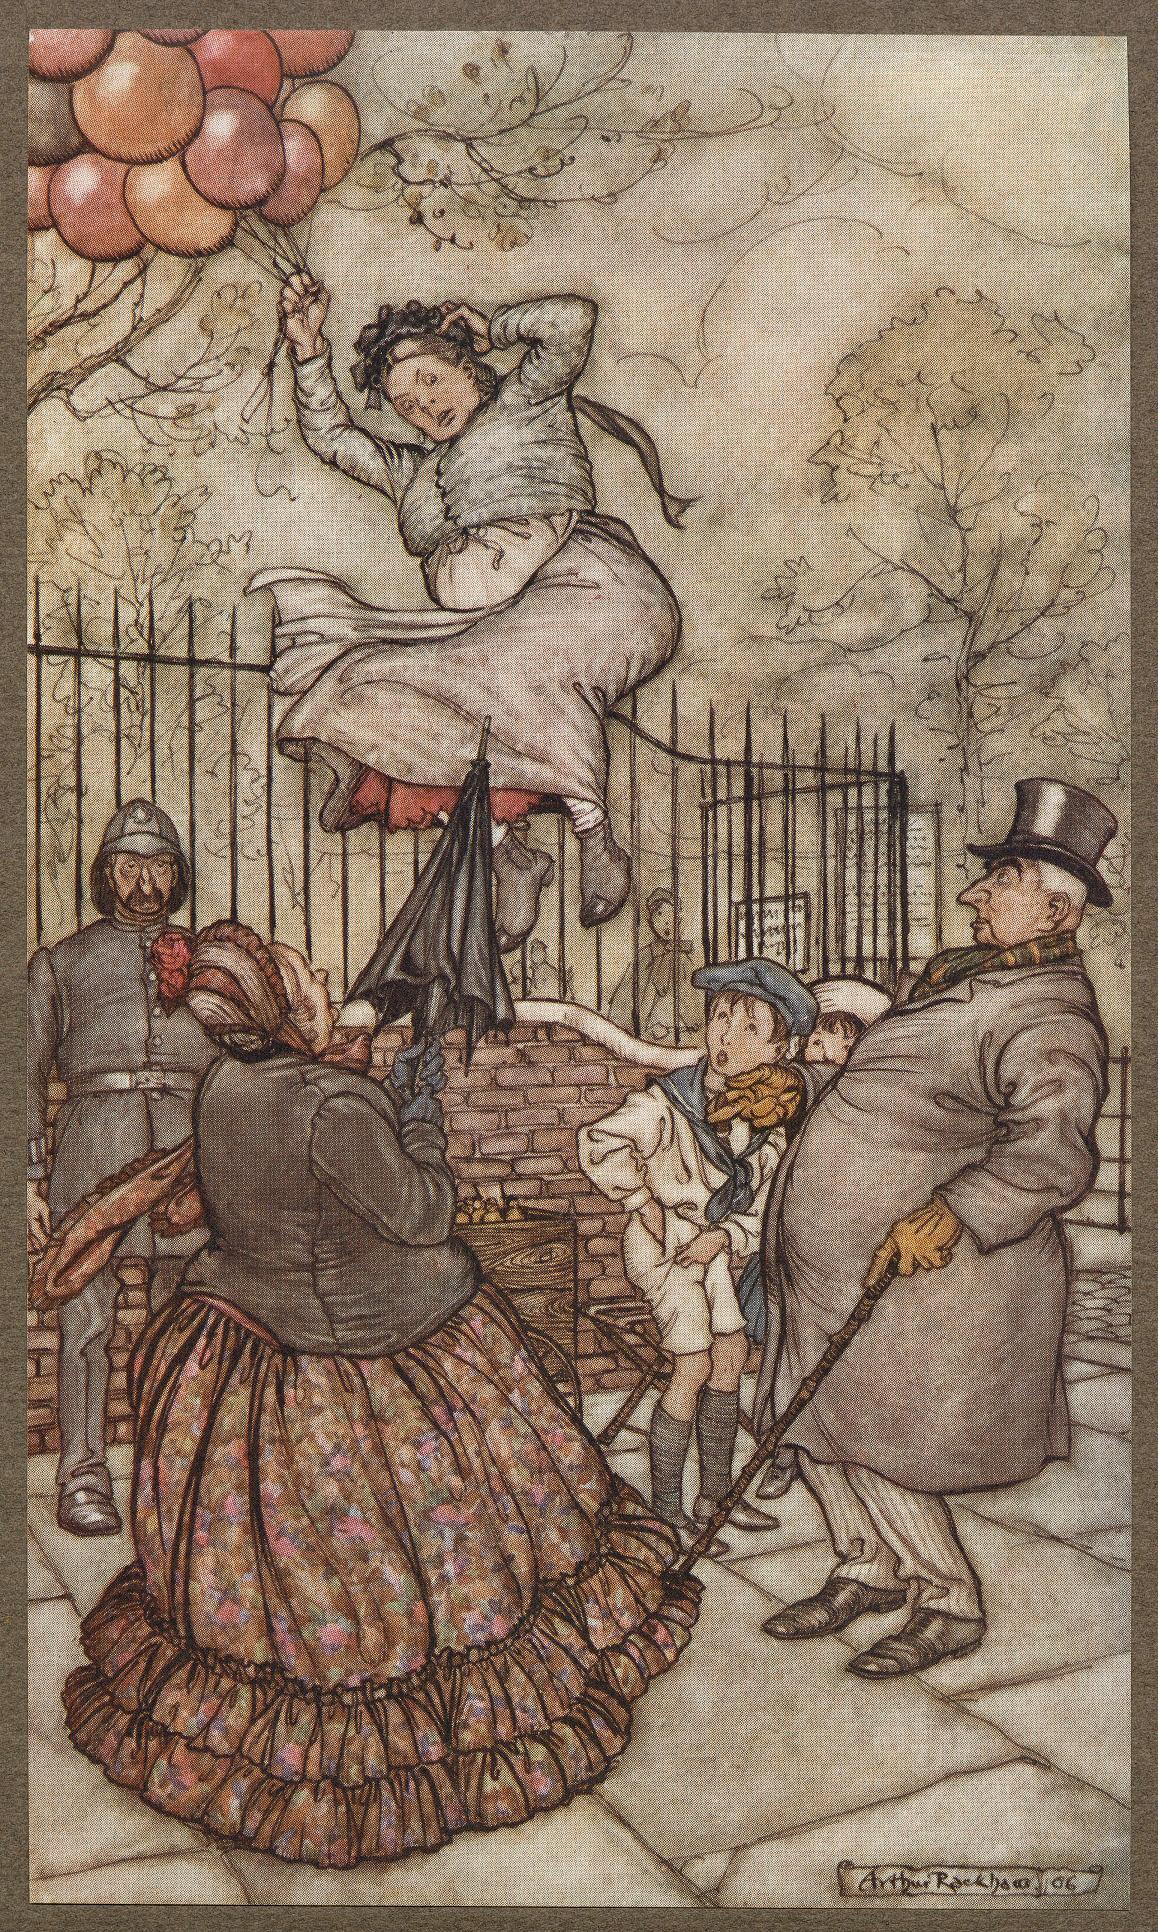 The balloon lady, illustrated by Arthur Rackham, featured in Peter Pan in Kensington Park